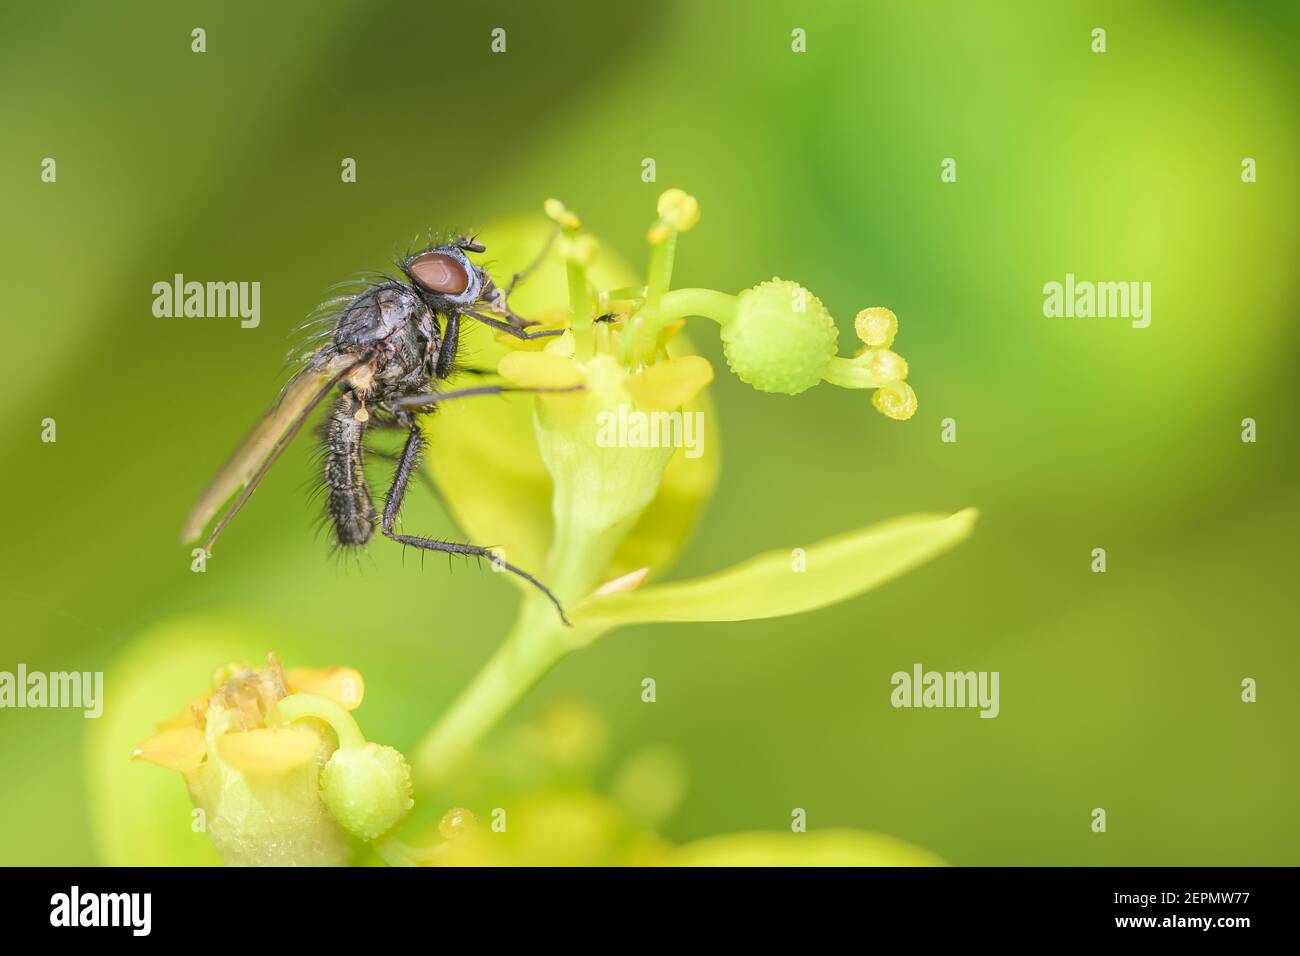 Delia radicum - the cabbage root fly, cabbage fly, root fly or turnip fly,  is a cosmopolitan pest of crops, resting on marsh spurge - Euphorbia palus Stock Photo